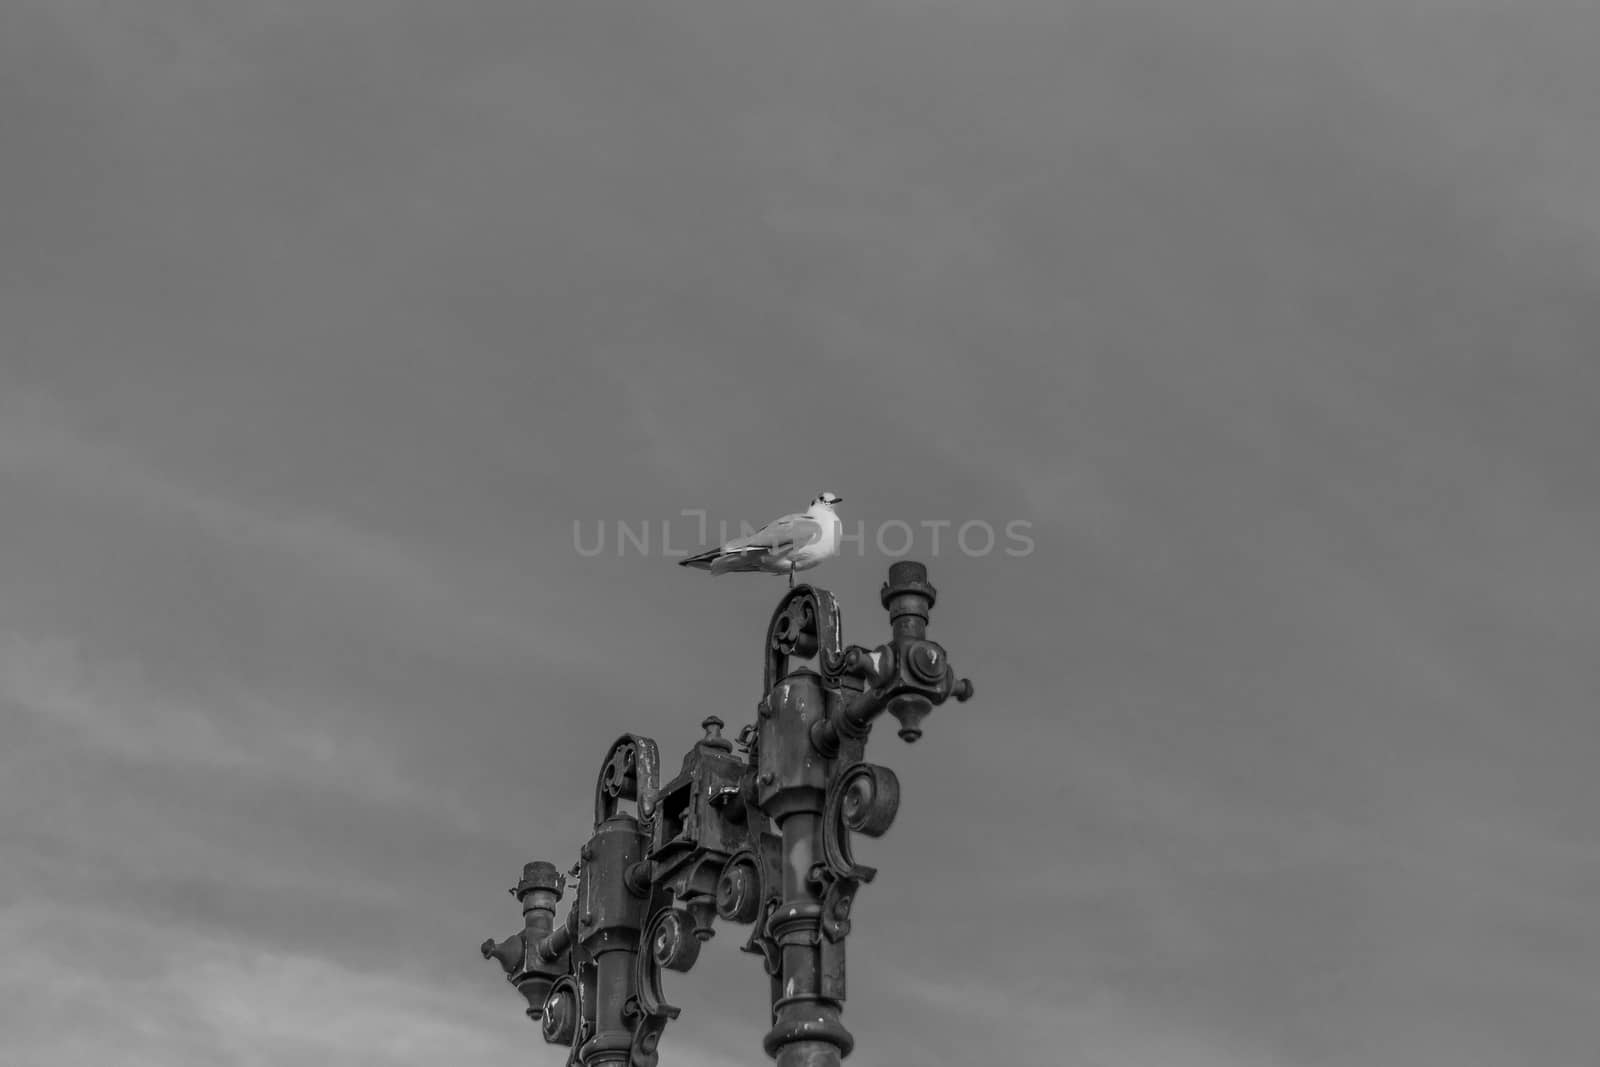 A seagull standing on an old lamp post with some interesting shapes and the sky in the background in black and white, Bucharest, Romania